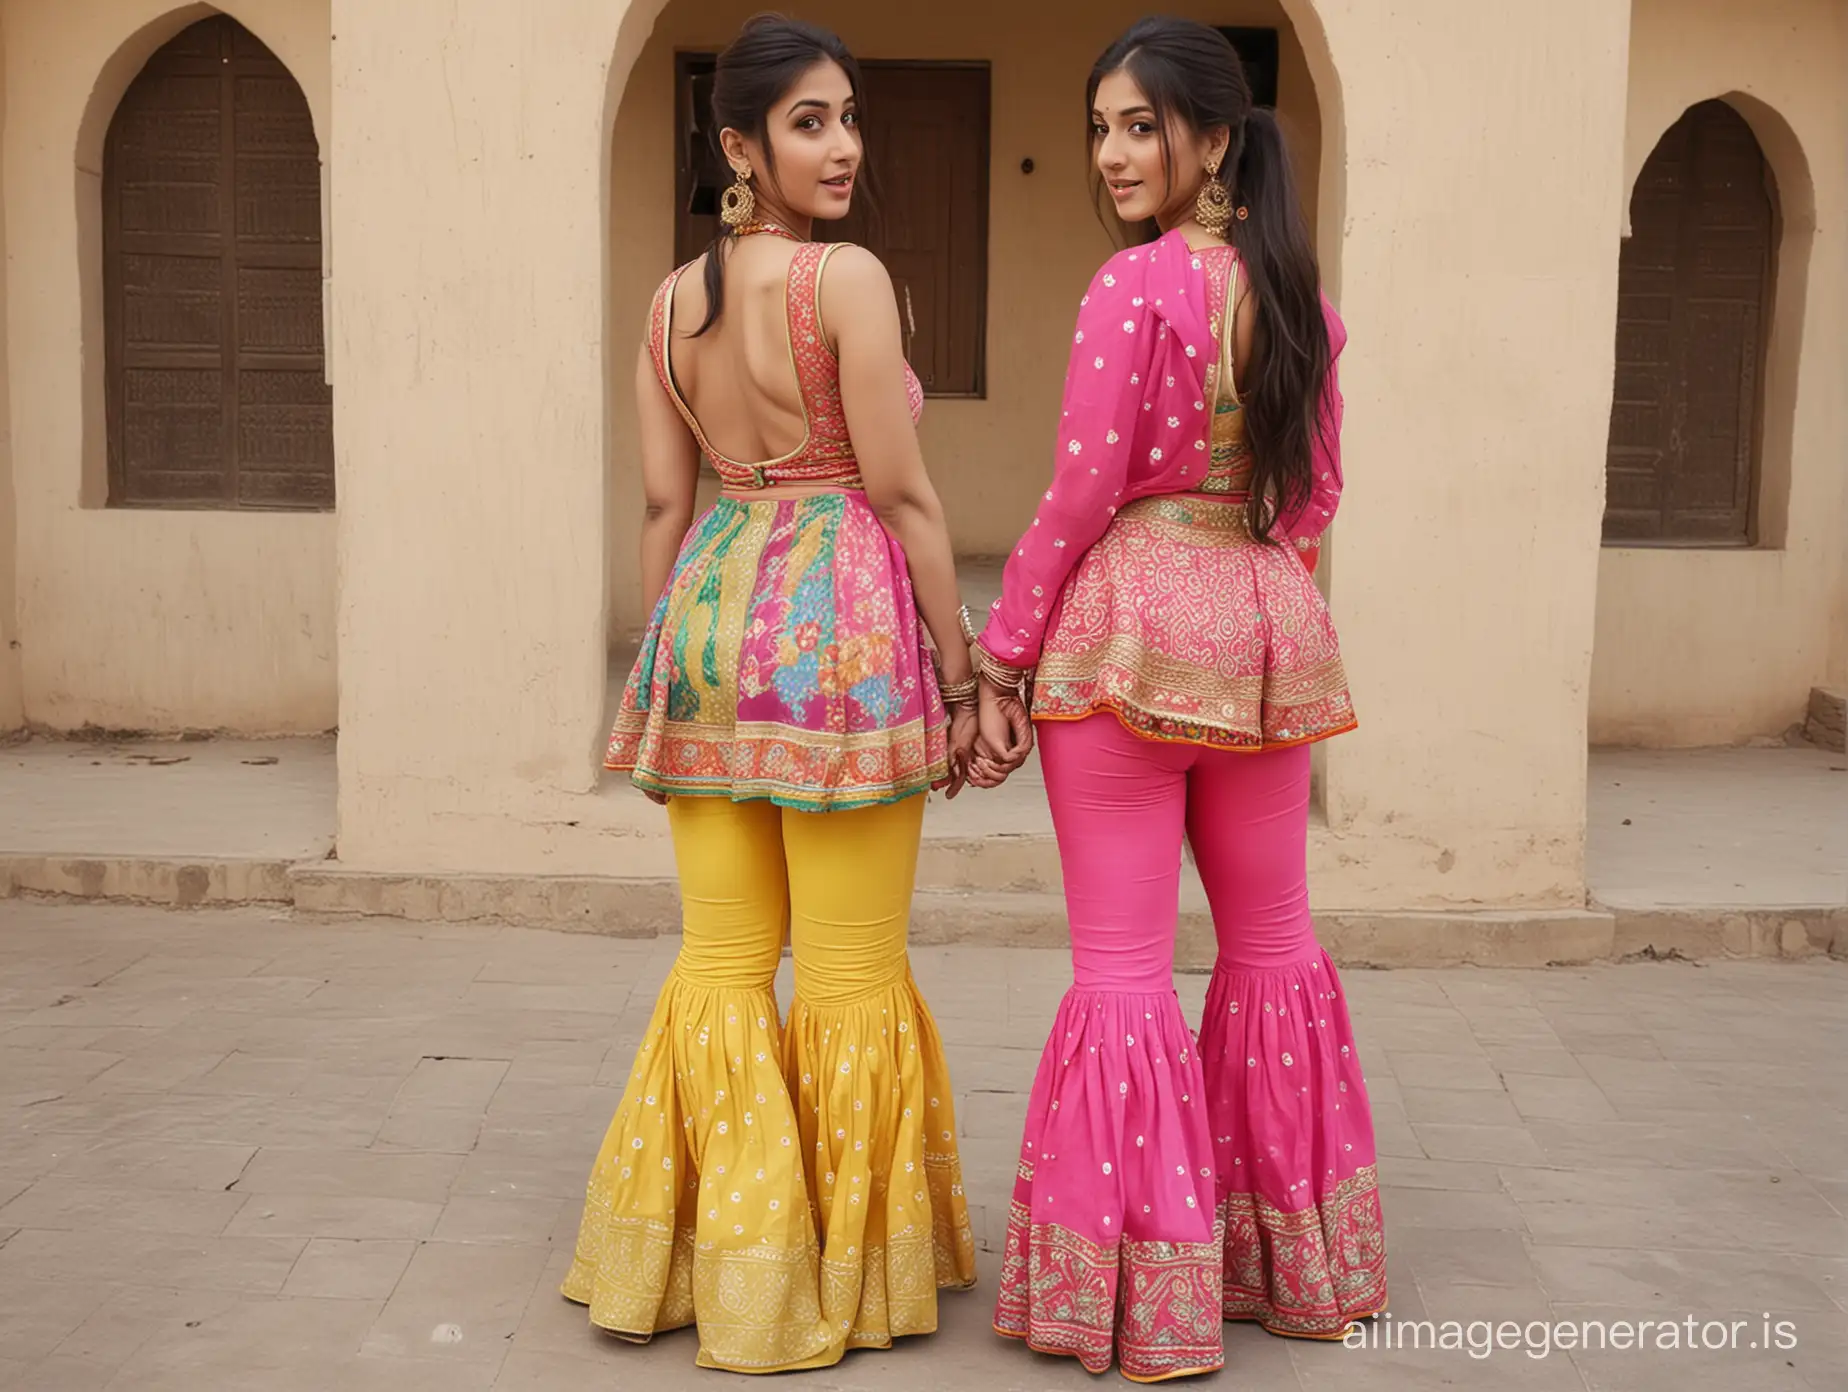 Colorful-Gharara-Pants-Fashion-with-Ponytails-and-Fitted-Tops